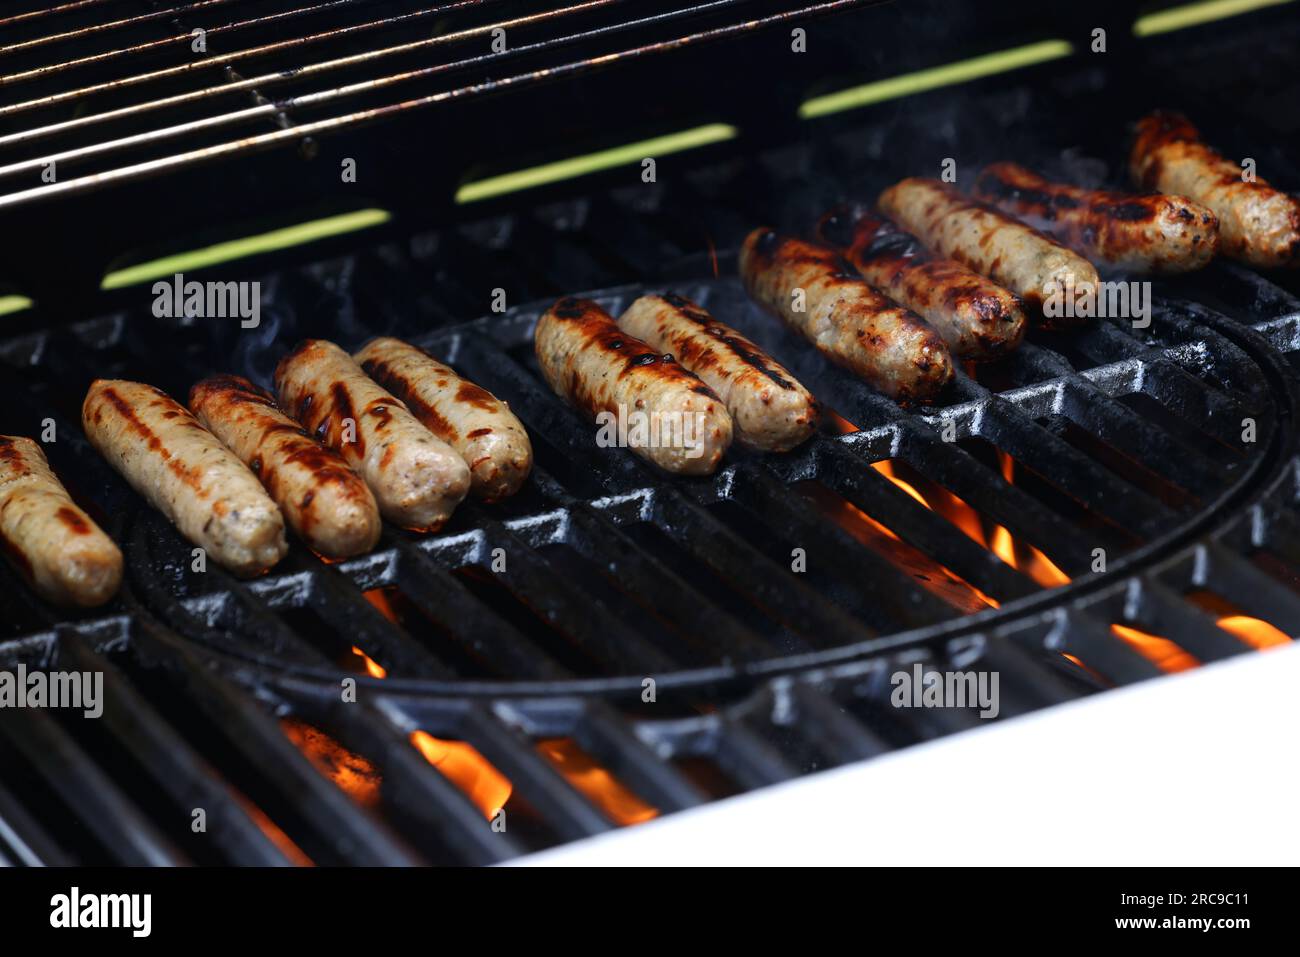 Loads of tasty meaty sausages cooking on a BBQ in London, UK. Stock Photo